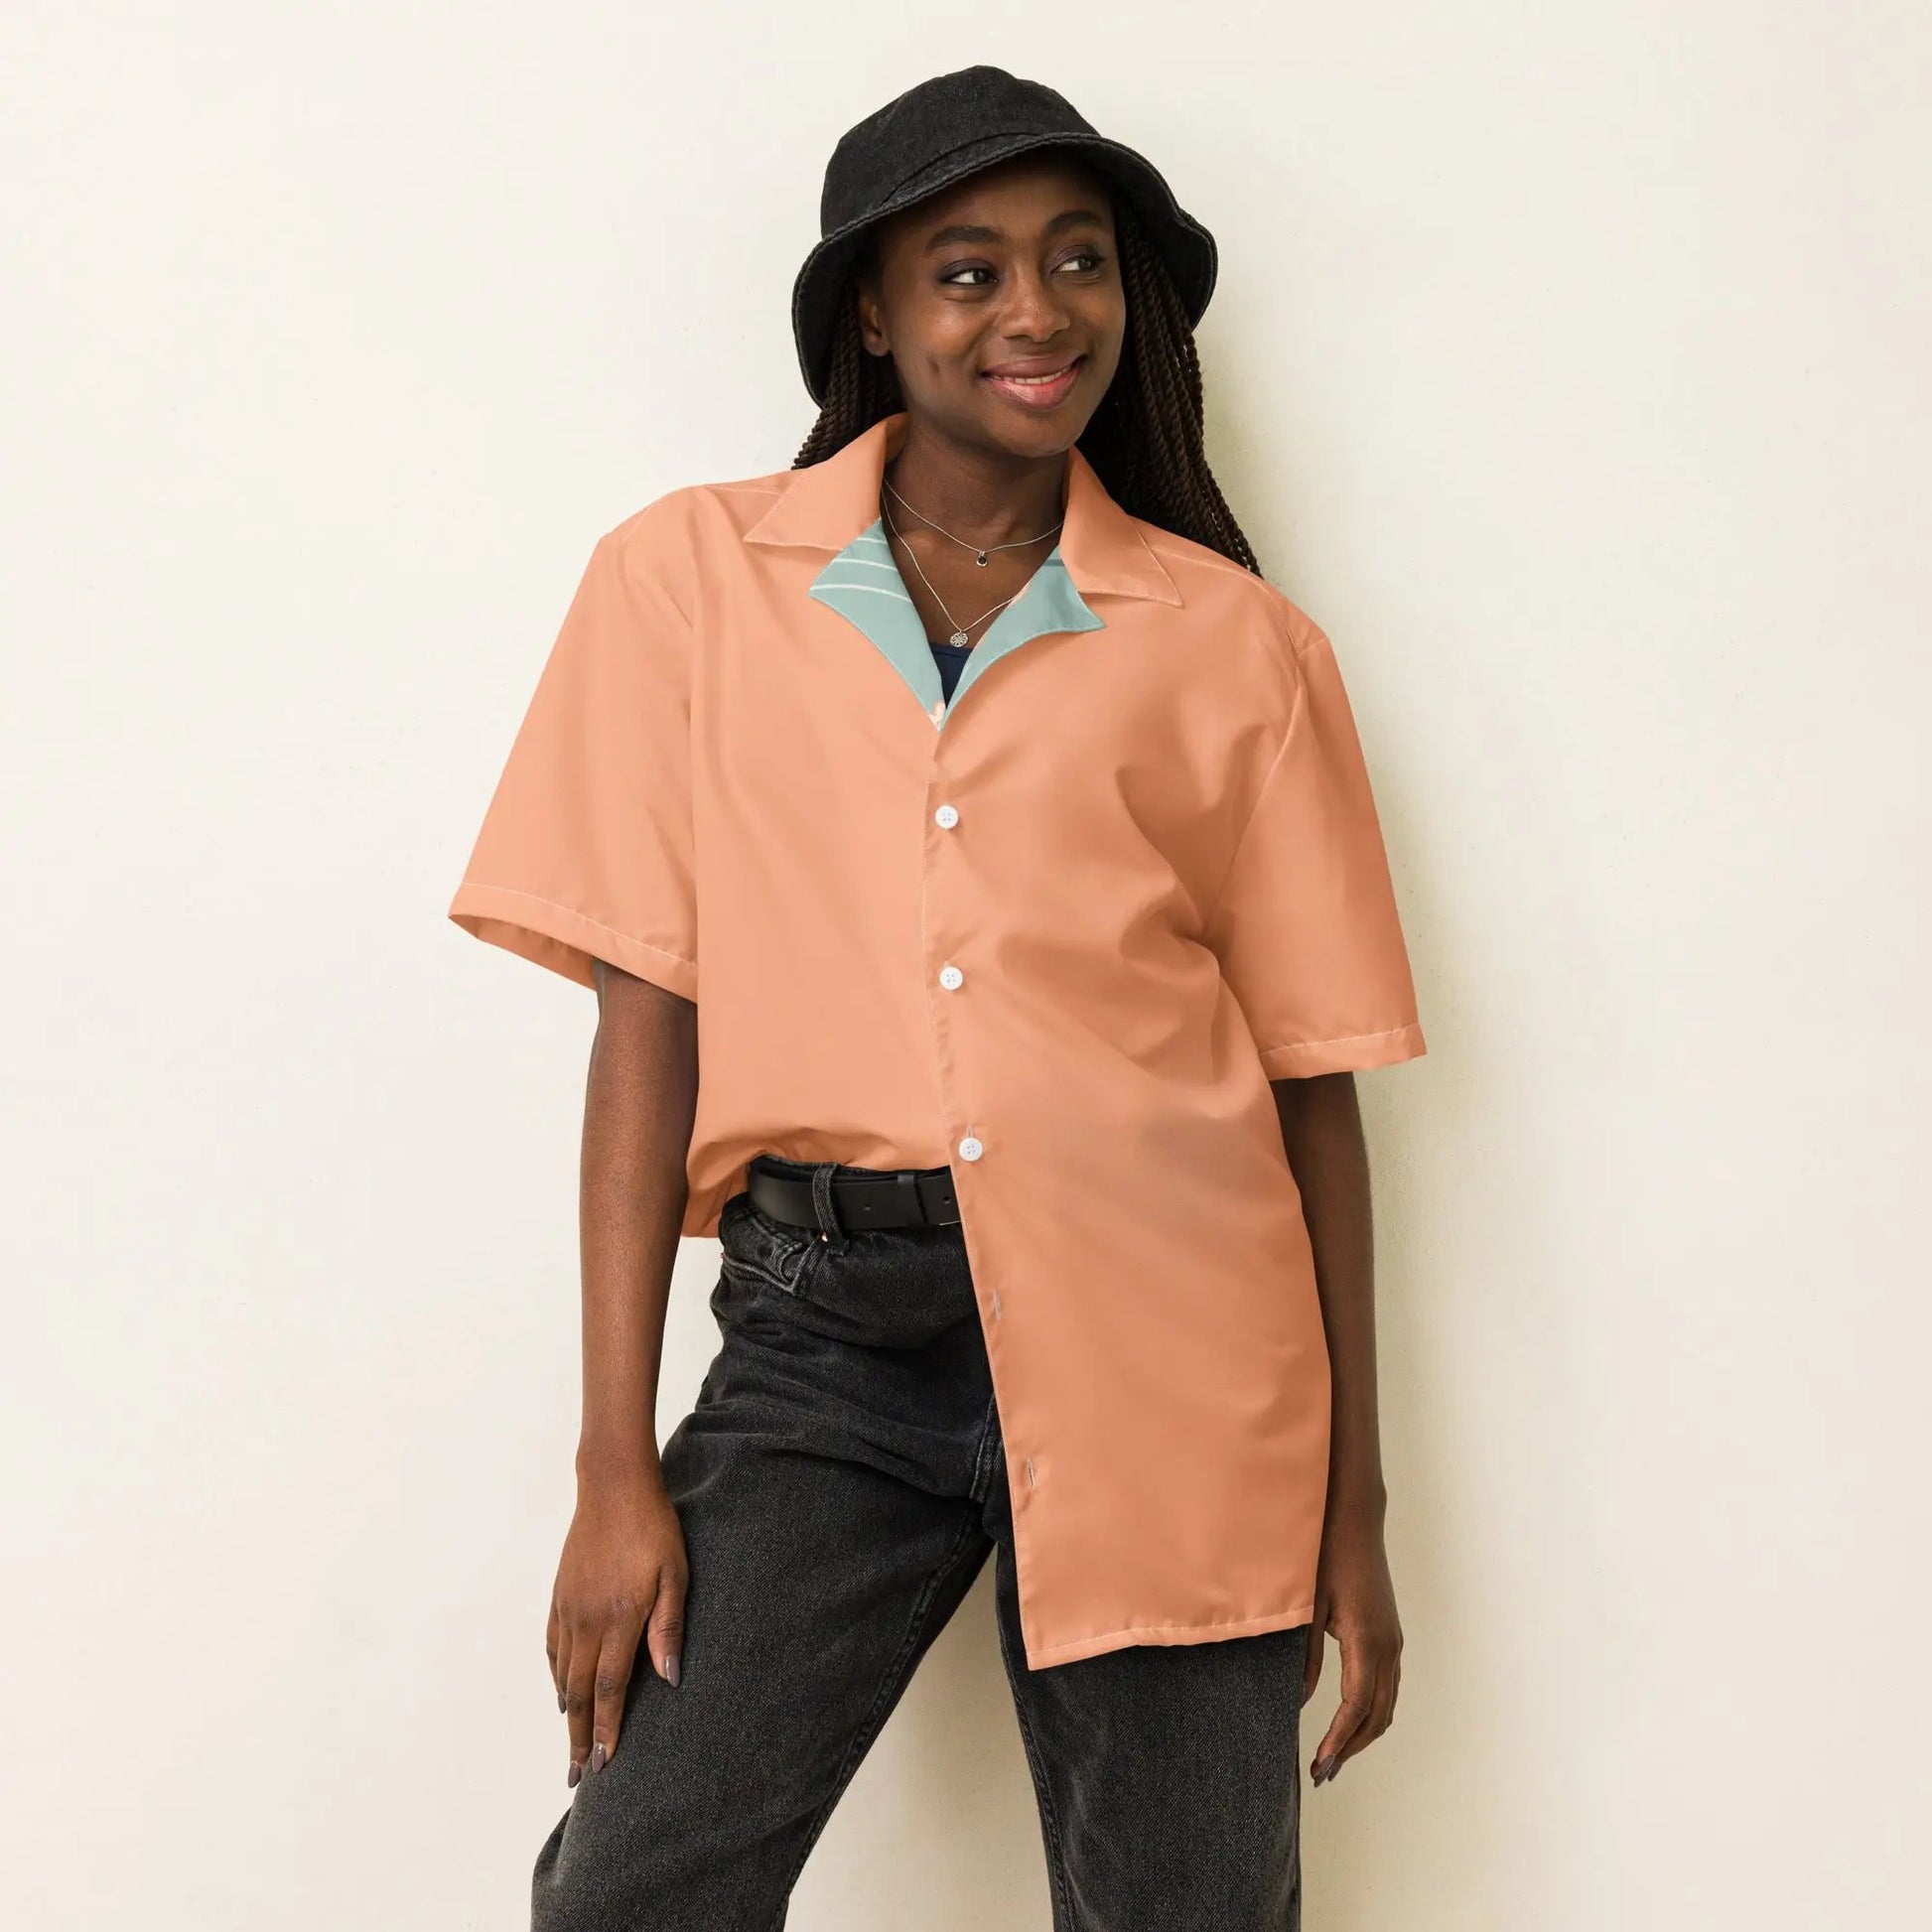 Meet your new favorite Men’s Women’s Button Sun protection Shirt for Hiking; our UPF 50+ short sleeve sun Protection shirt from Appalachian Bittersweet! 